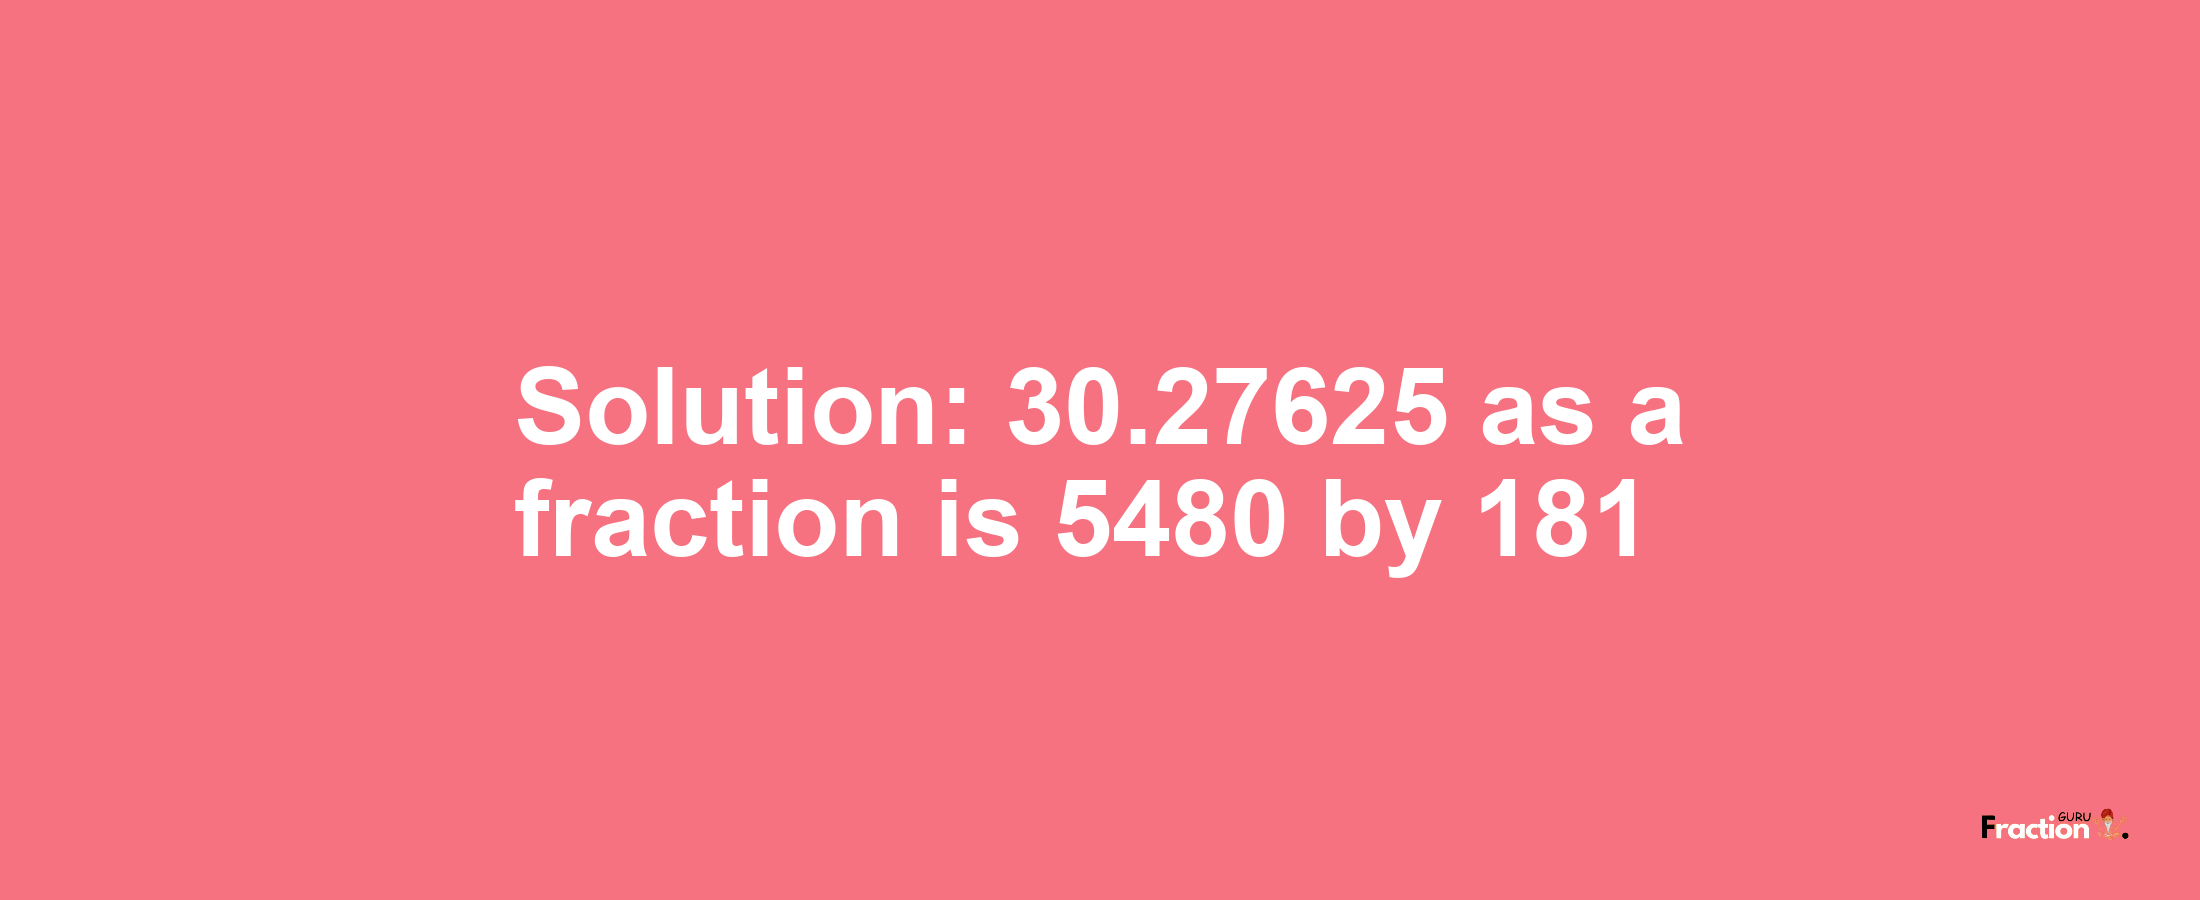 Solution:30.27625 as a fraction is 5480/181